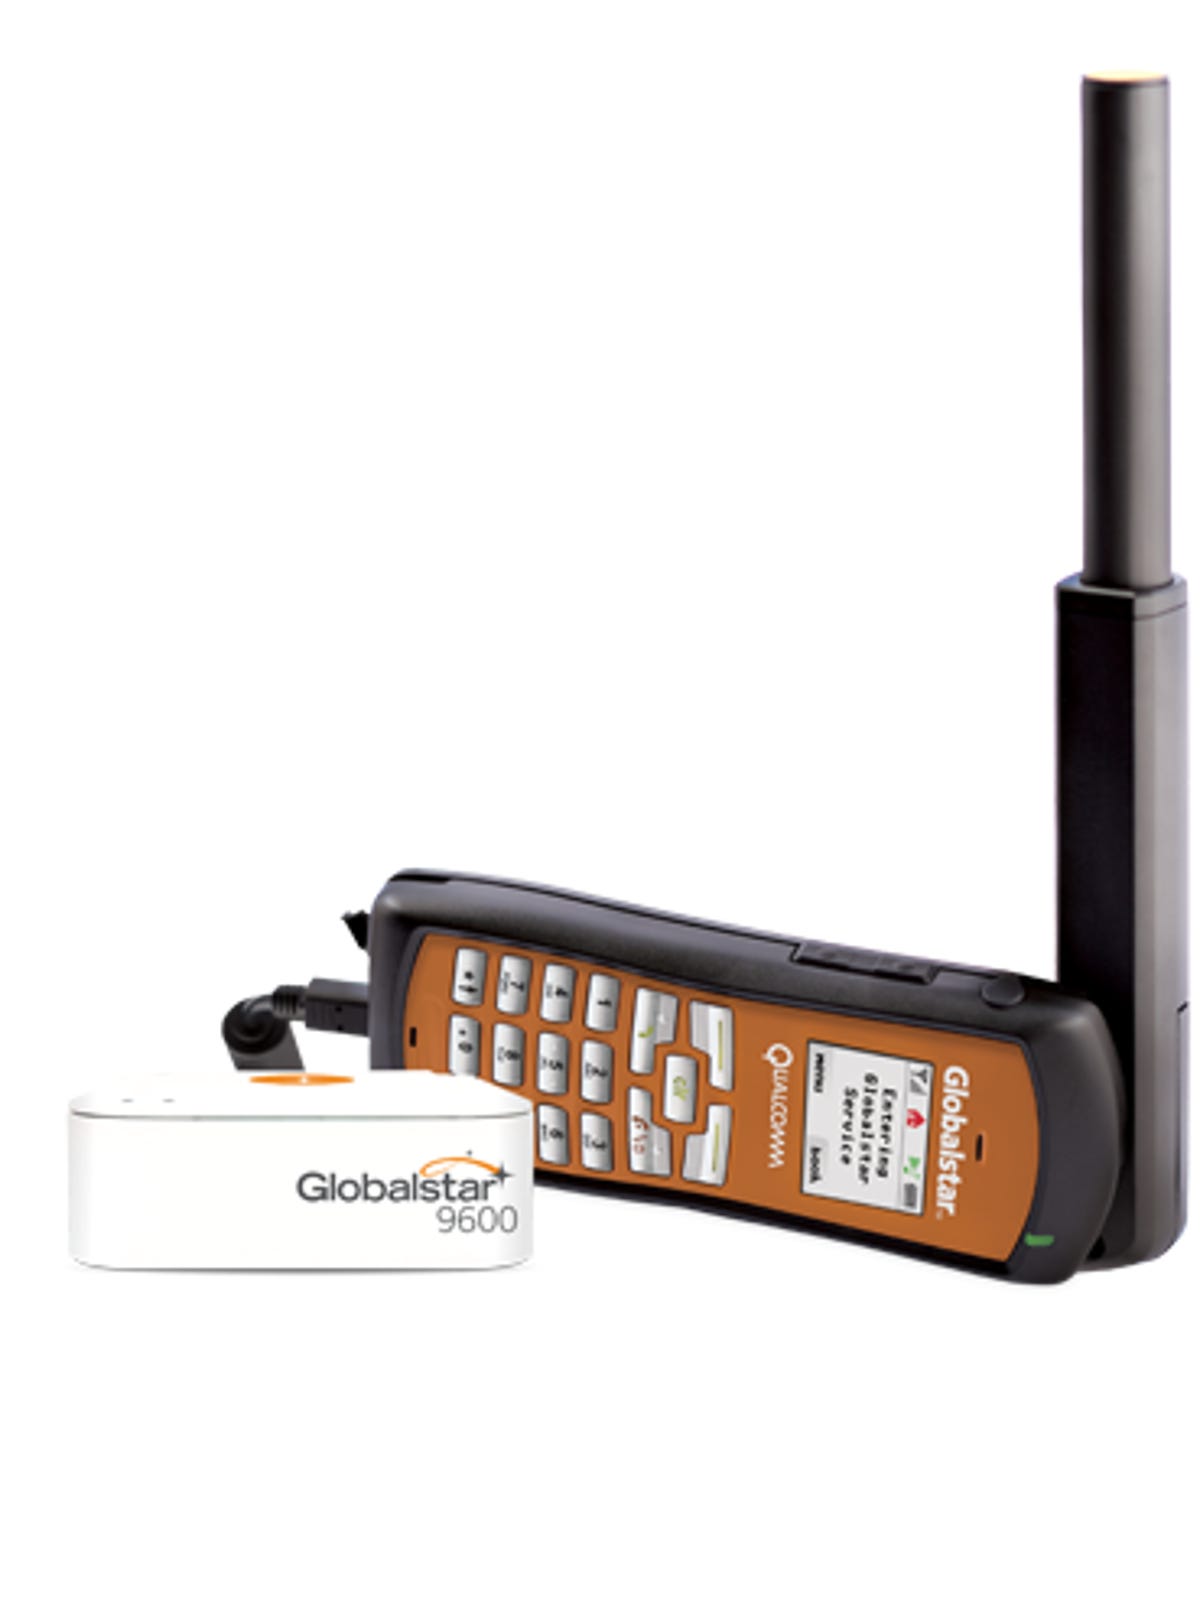 Globalstar GSP-1700 with the 9600